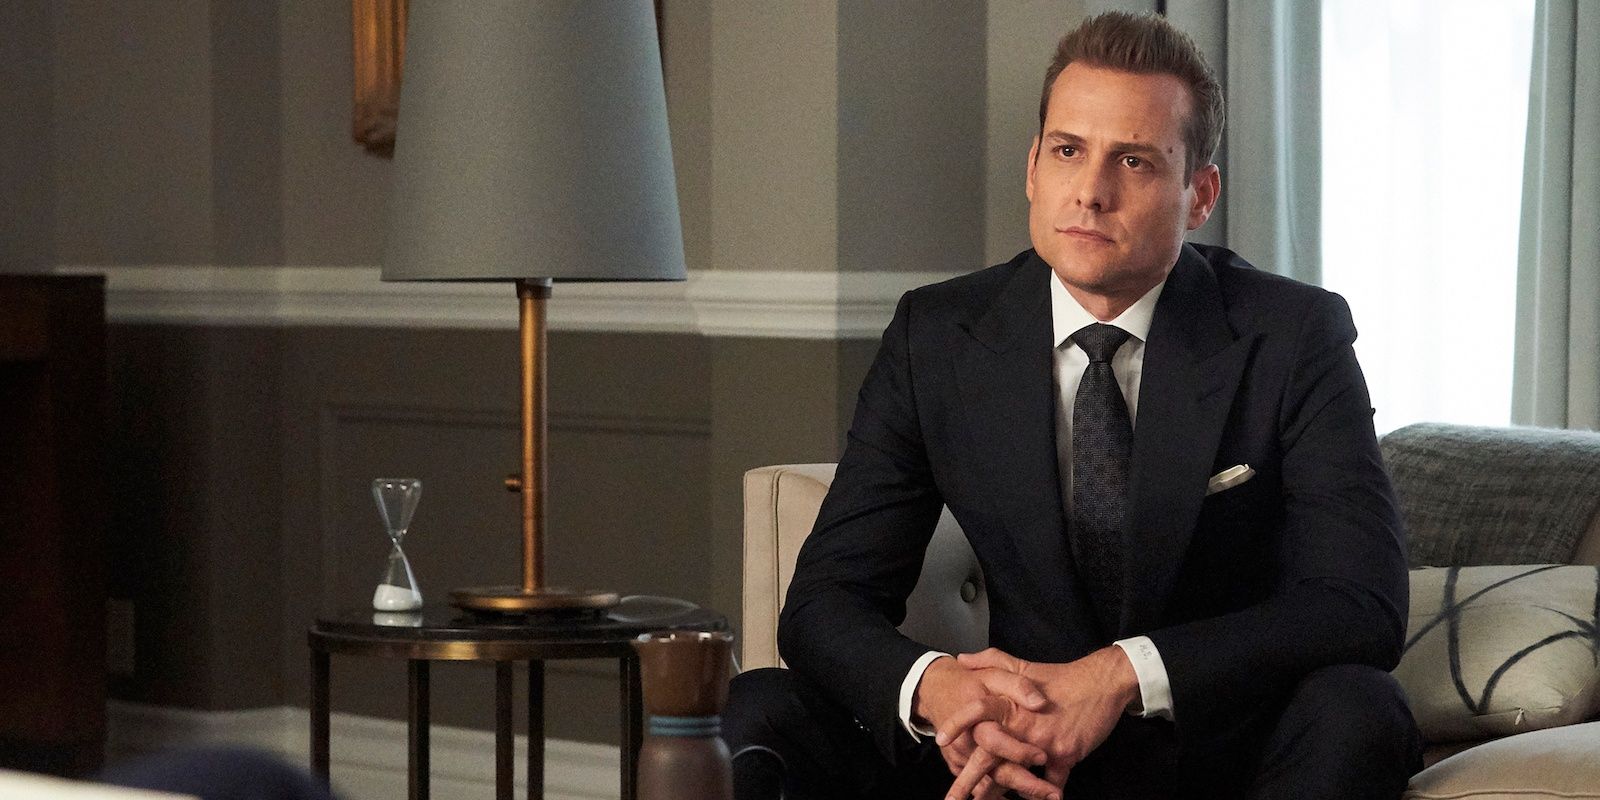 Harvey-Spectre played by Gabriel Macht in one of the scenes in Suits.